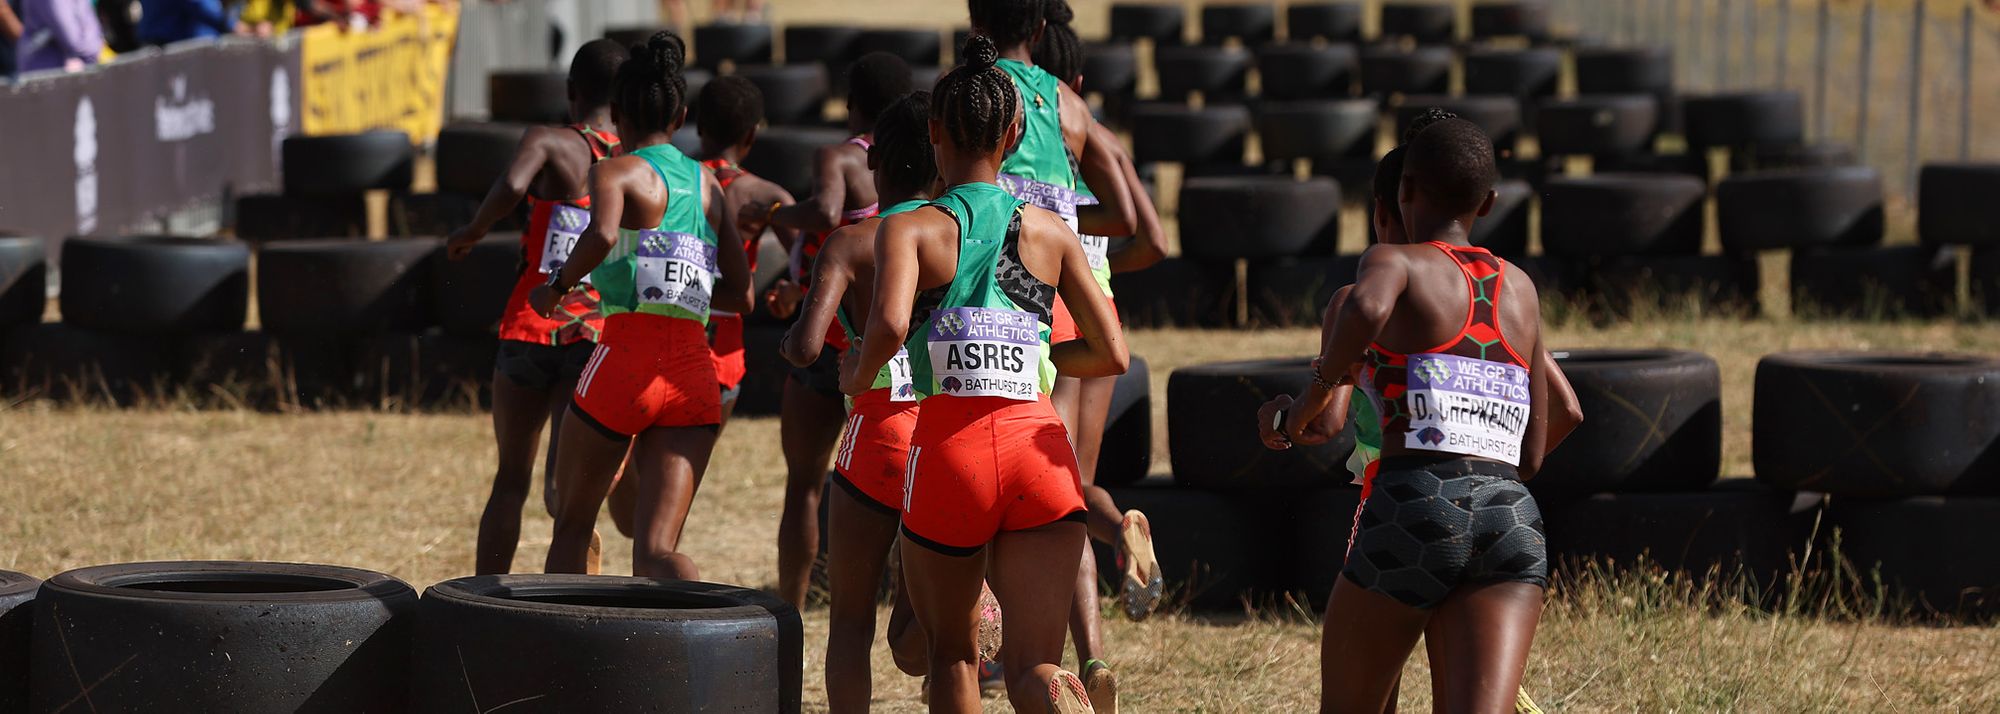 Some of the world’s best distance athletes have won the women’s U20 world cross country title as a launch path to their senior careers